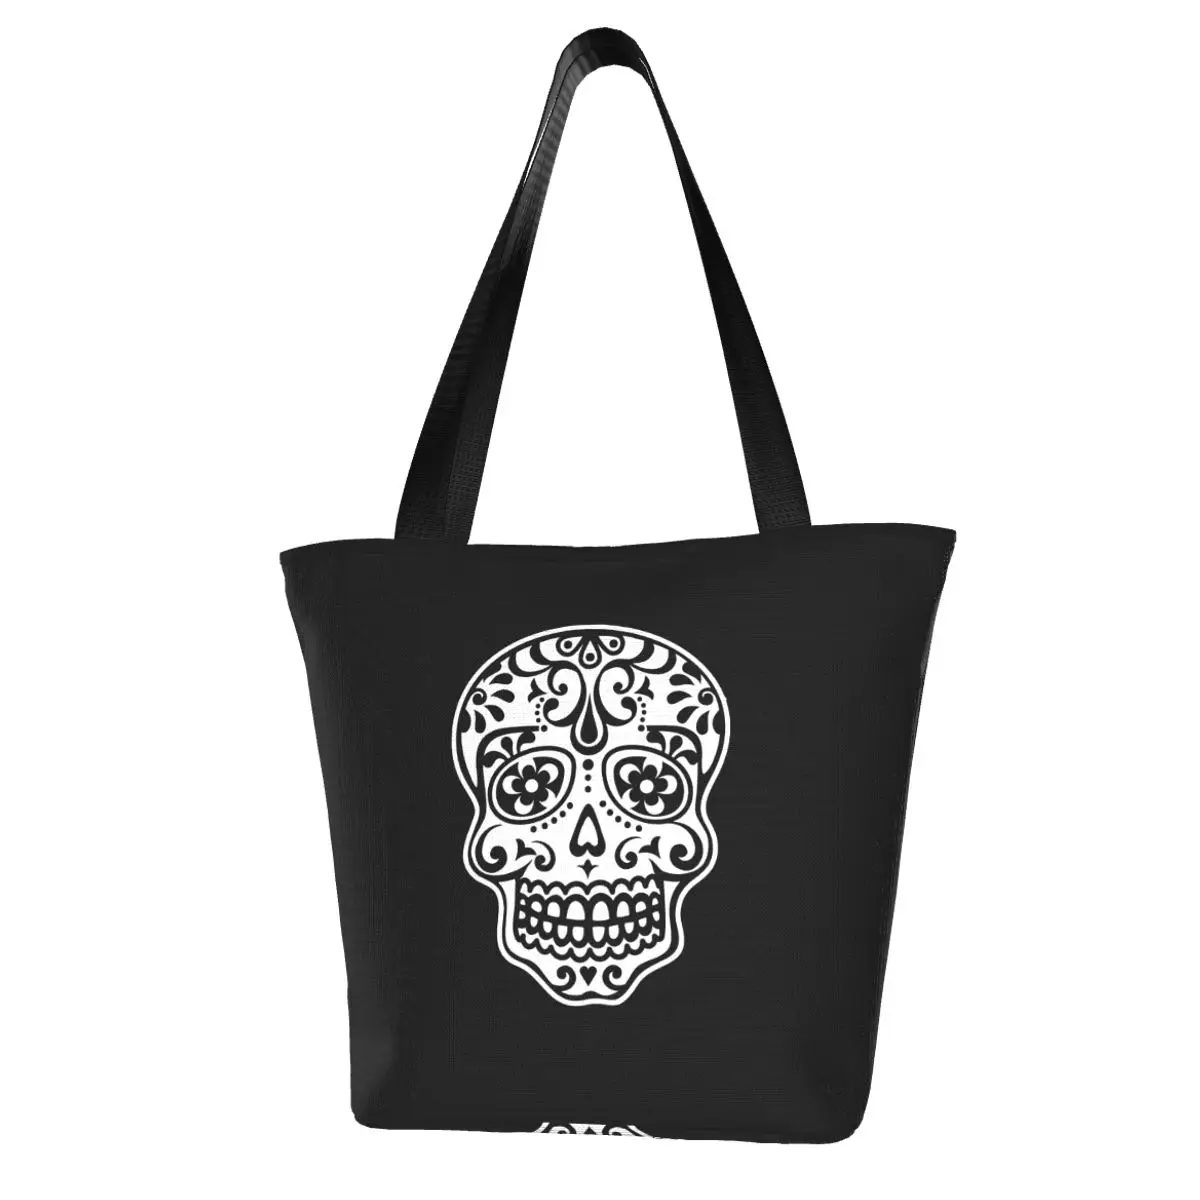 Mexican Skull, Floral Pattern - Days Of The Dead Shopping Bag Aesthetic Cloth Outdoor Handbag Female Fashion Bags